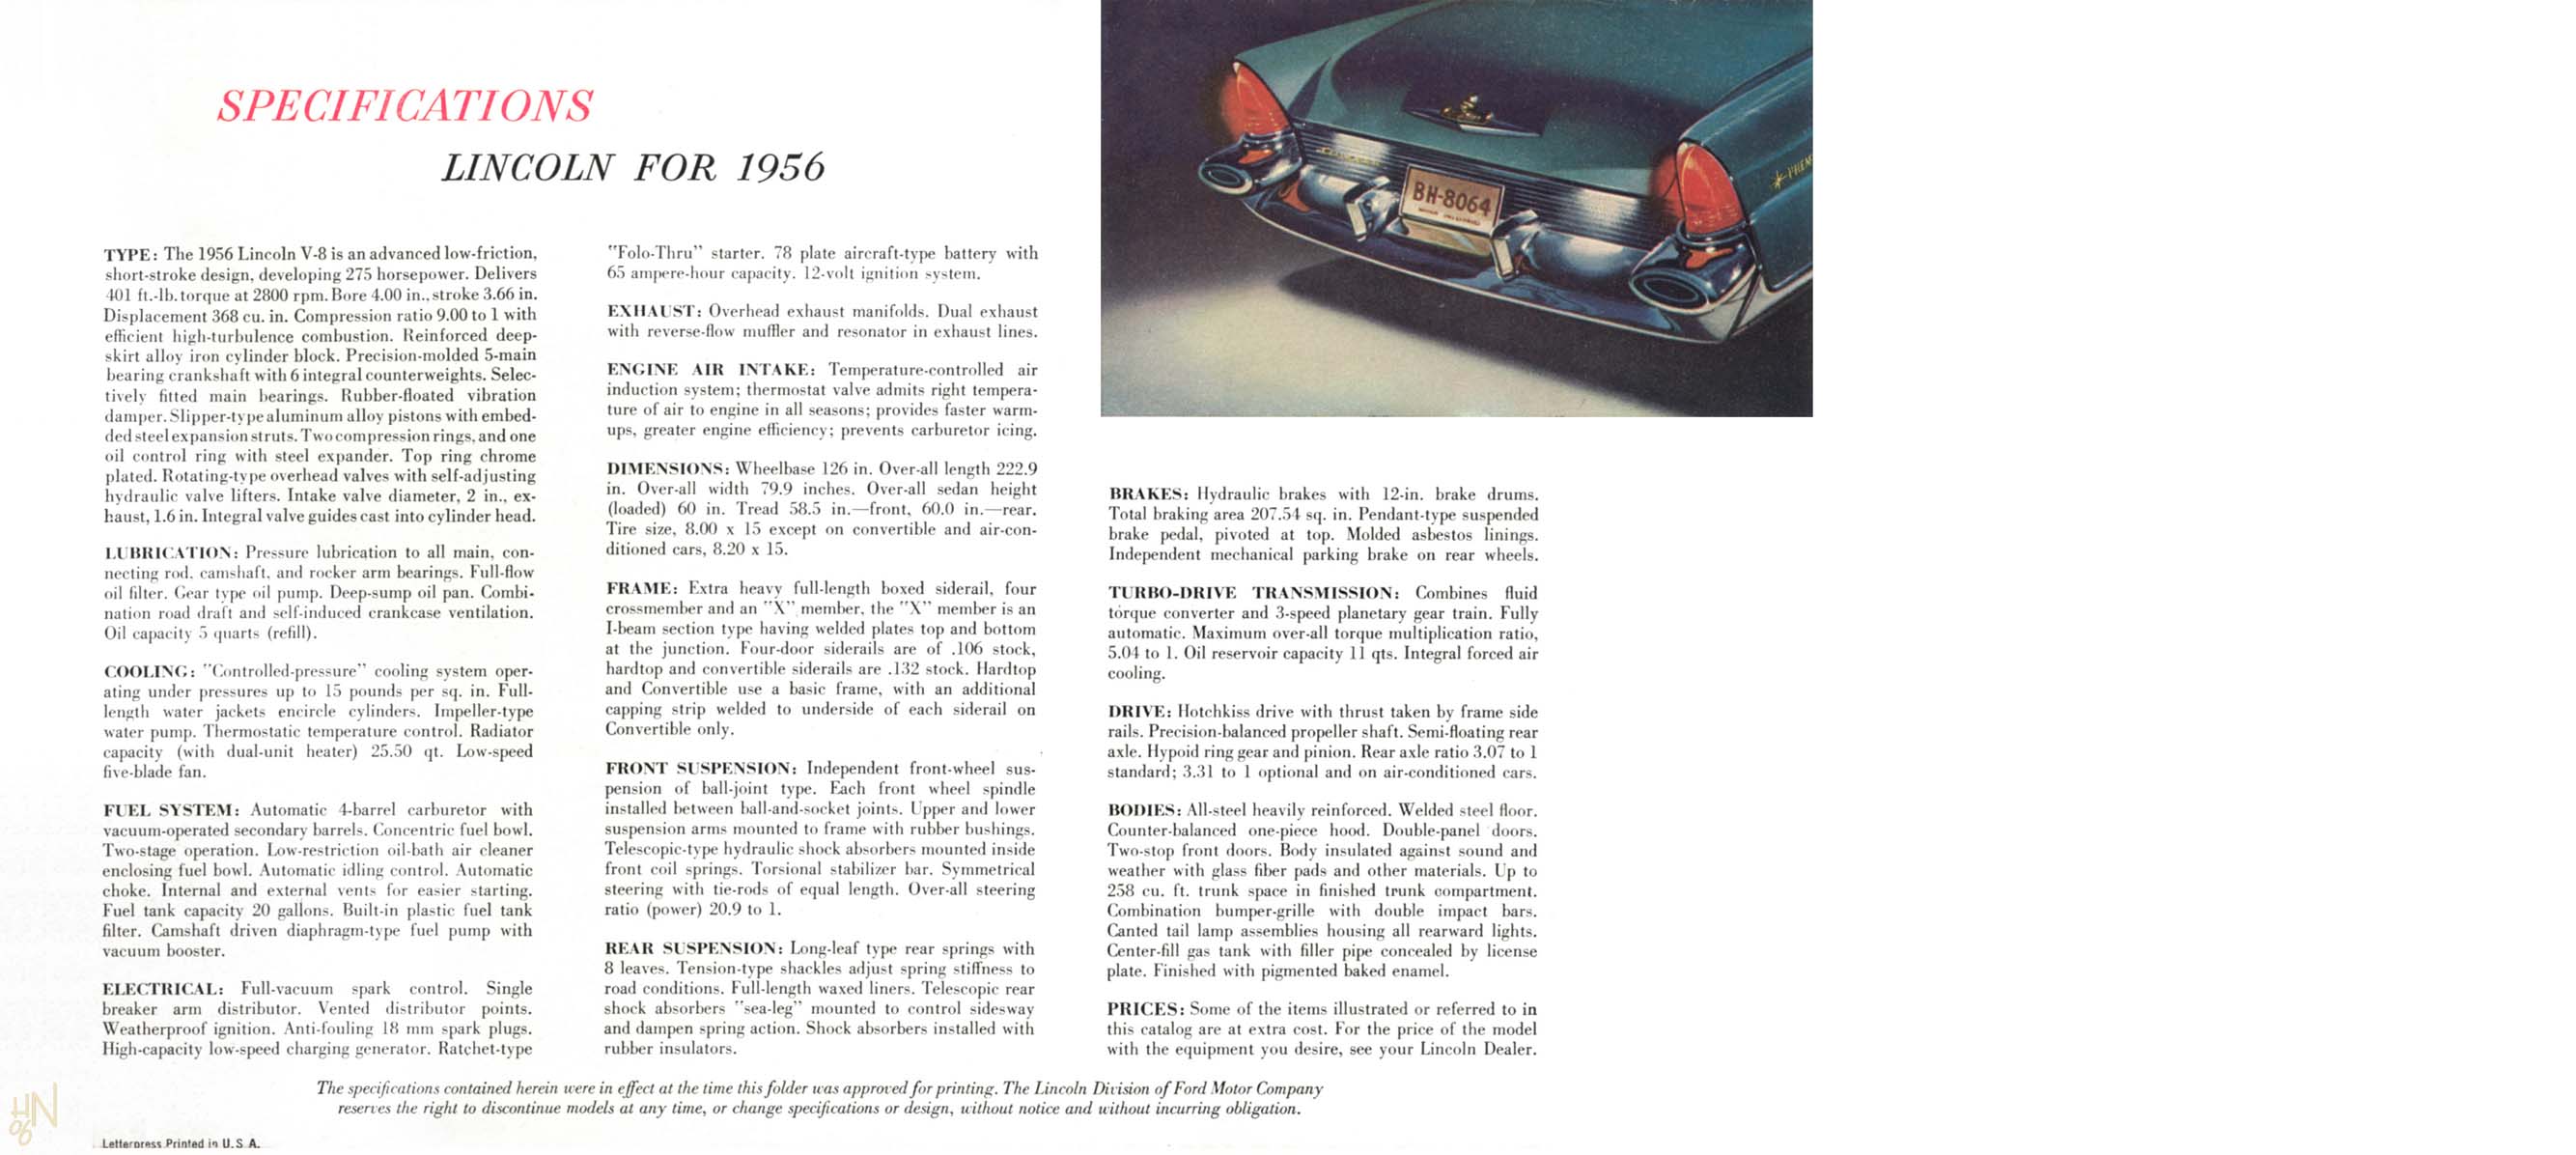 1956 Lincoln Foldout-12